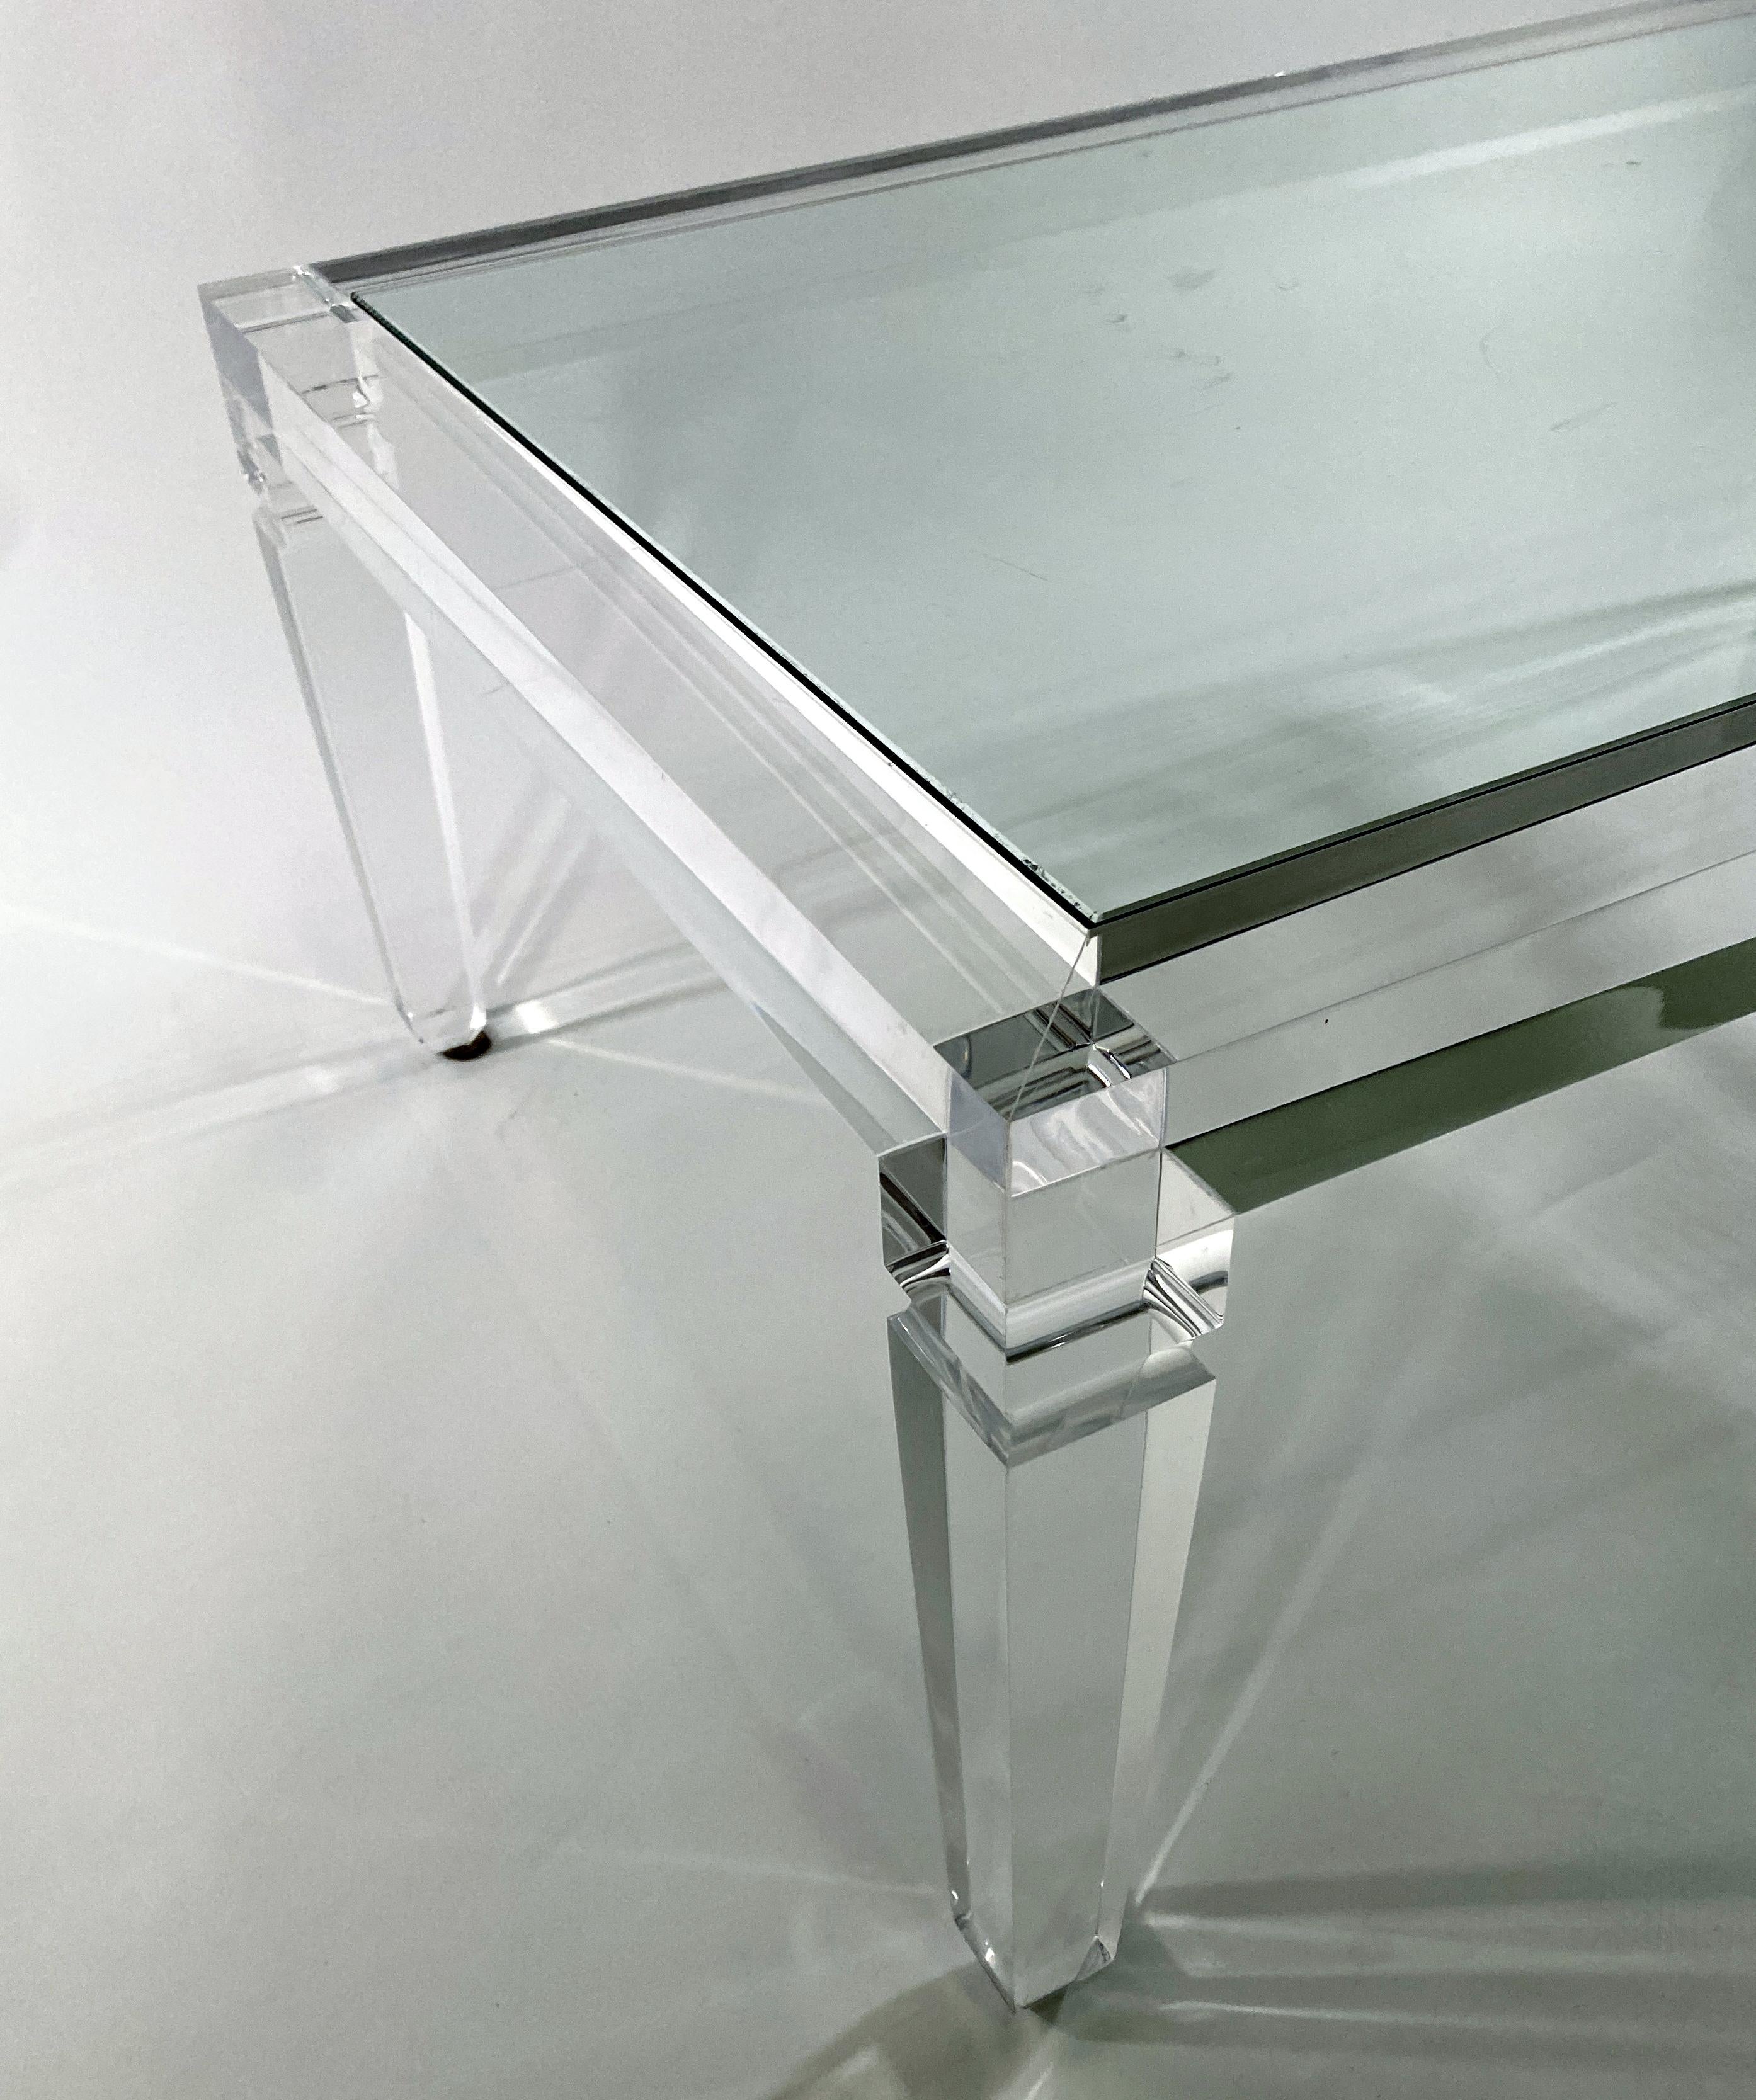 Late 20th Century American Modern Lucite and Glass Cocktail Table, Charles Hollis Jones For Sale